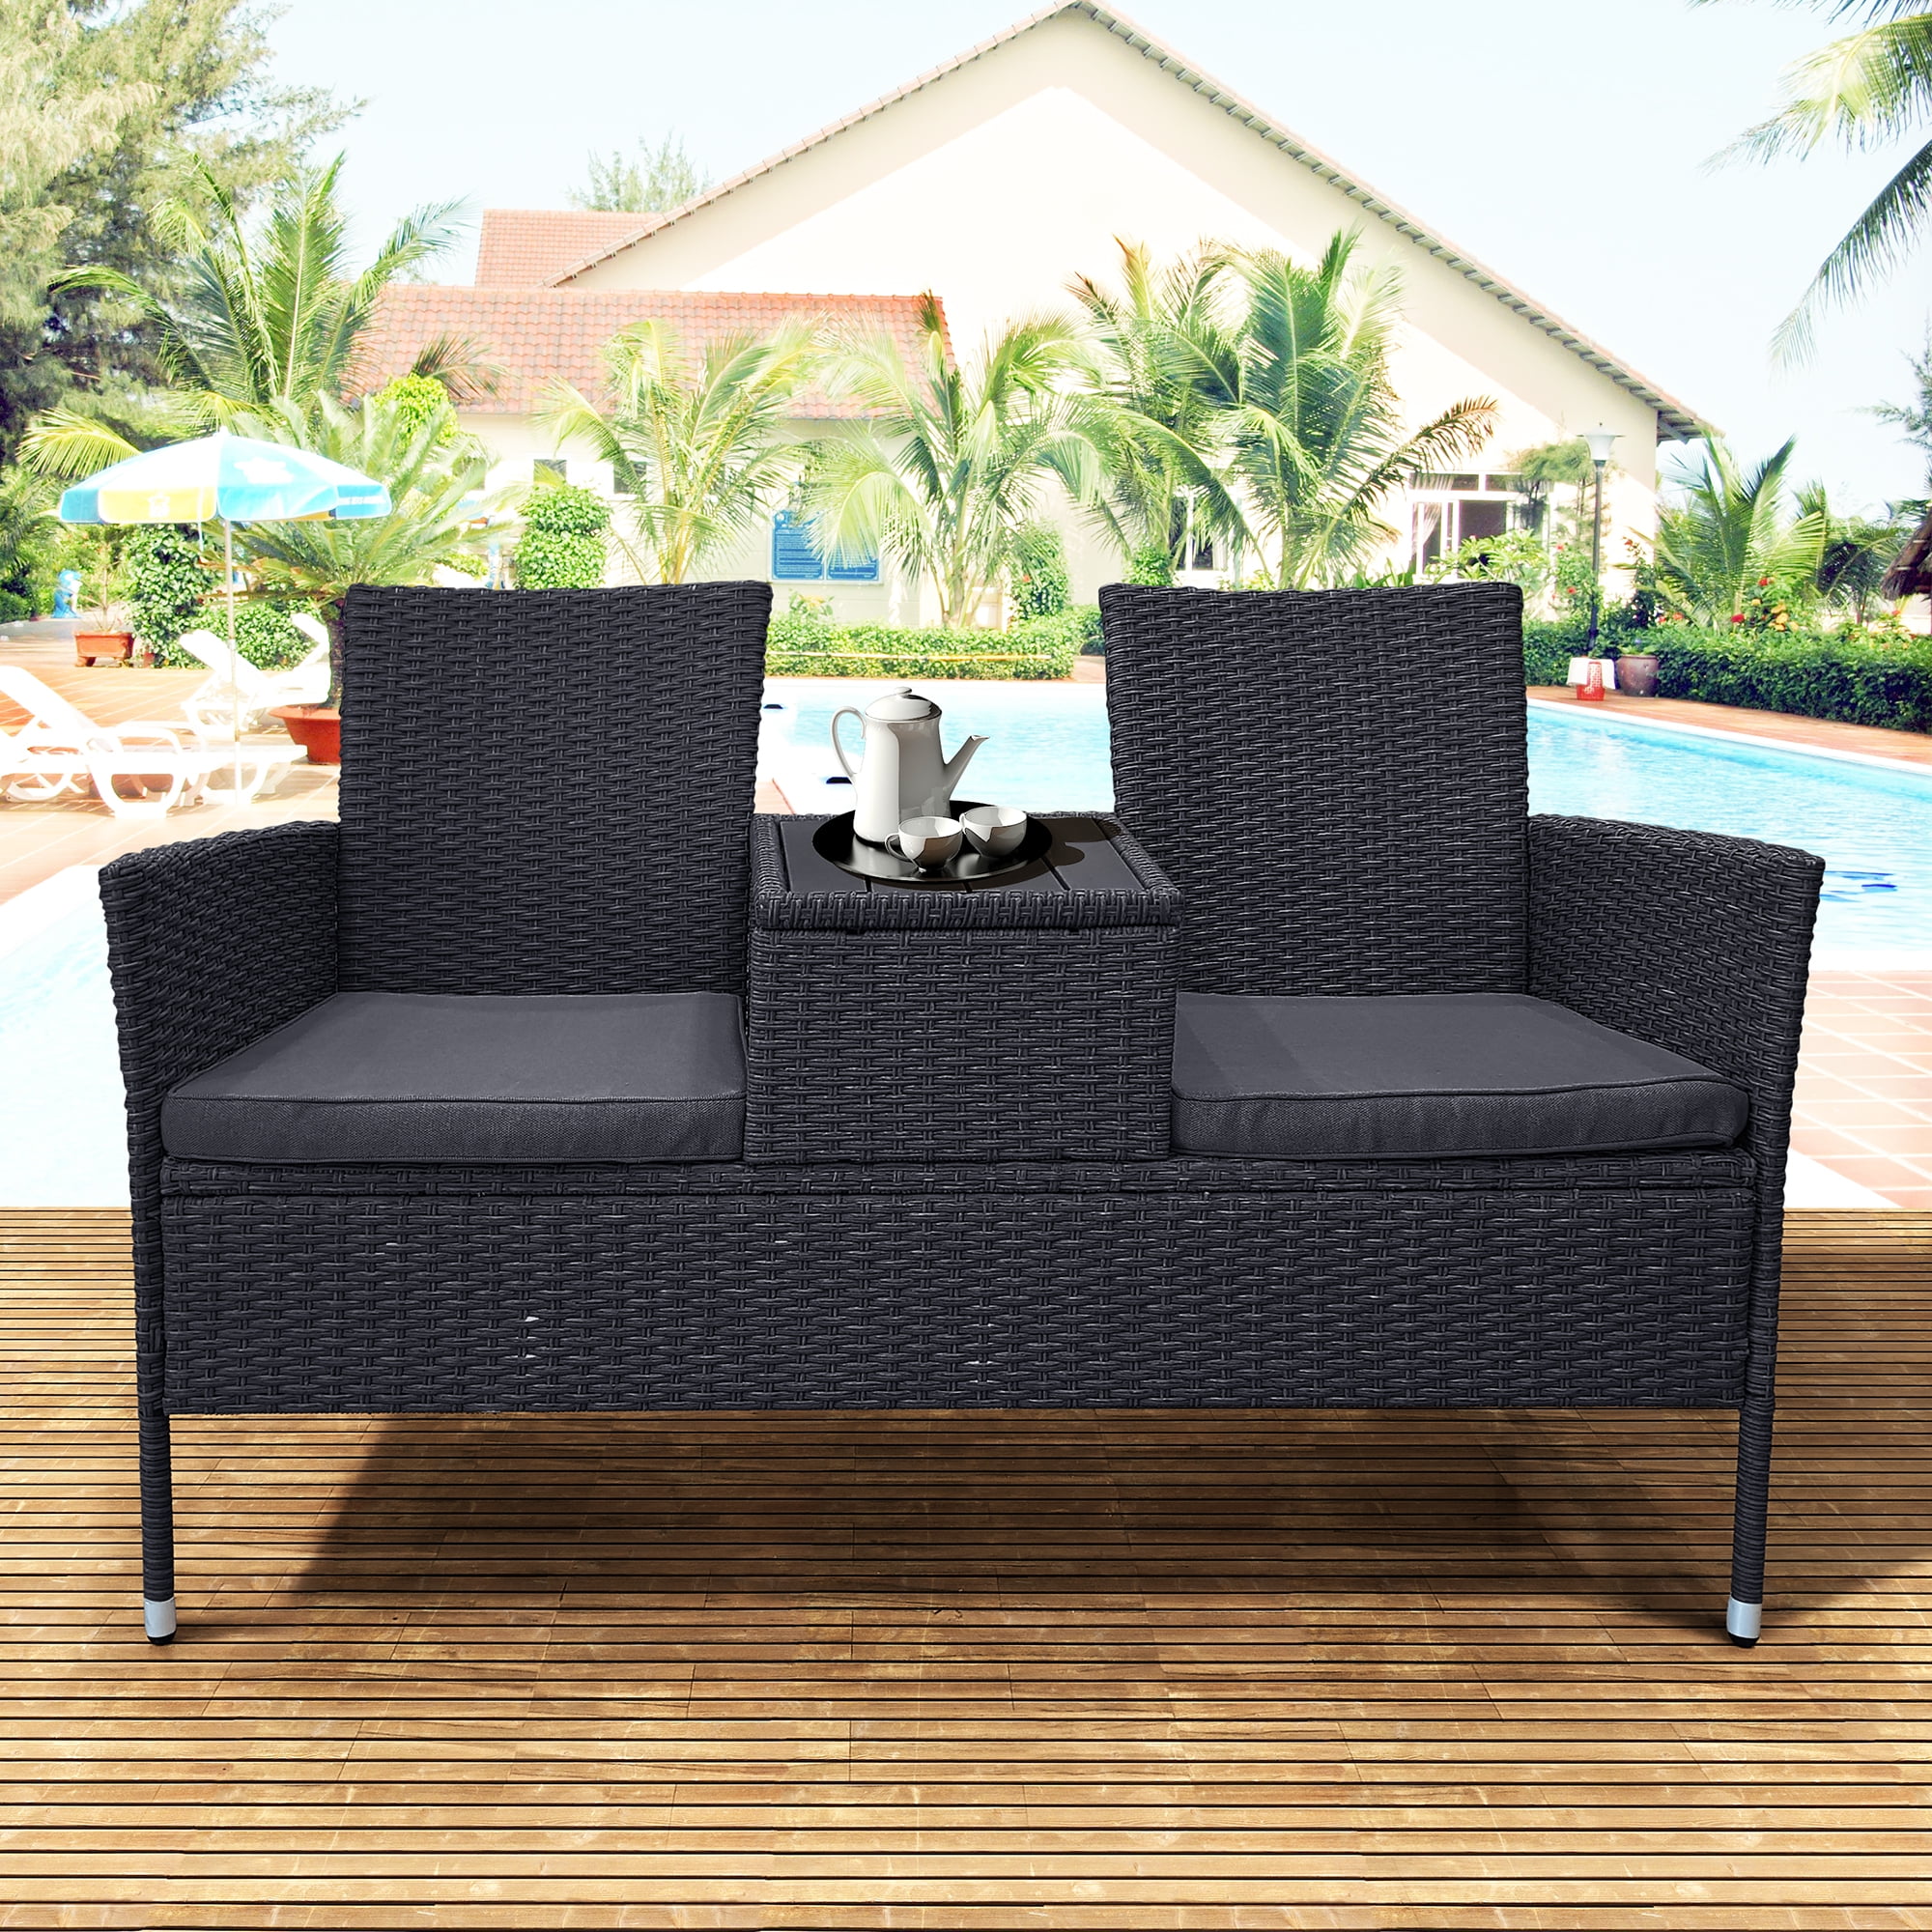 Clearance! Outdoor Conversation Set, Rattan Wicker 2-Person Sofa